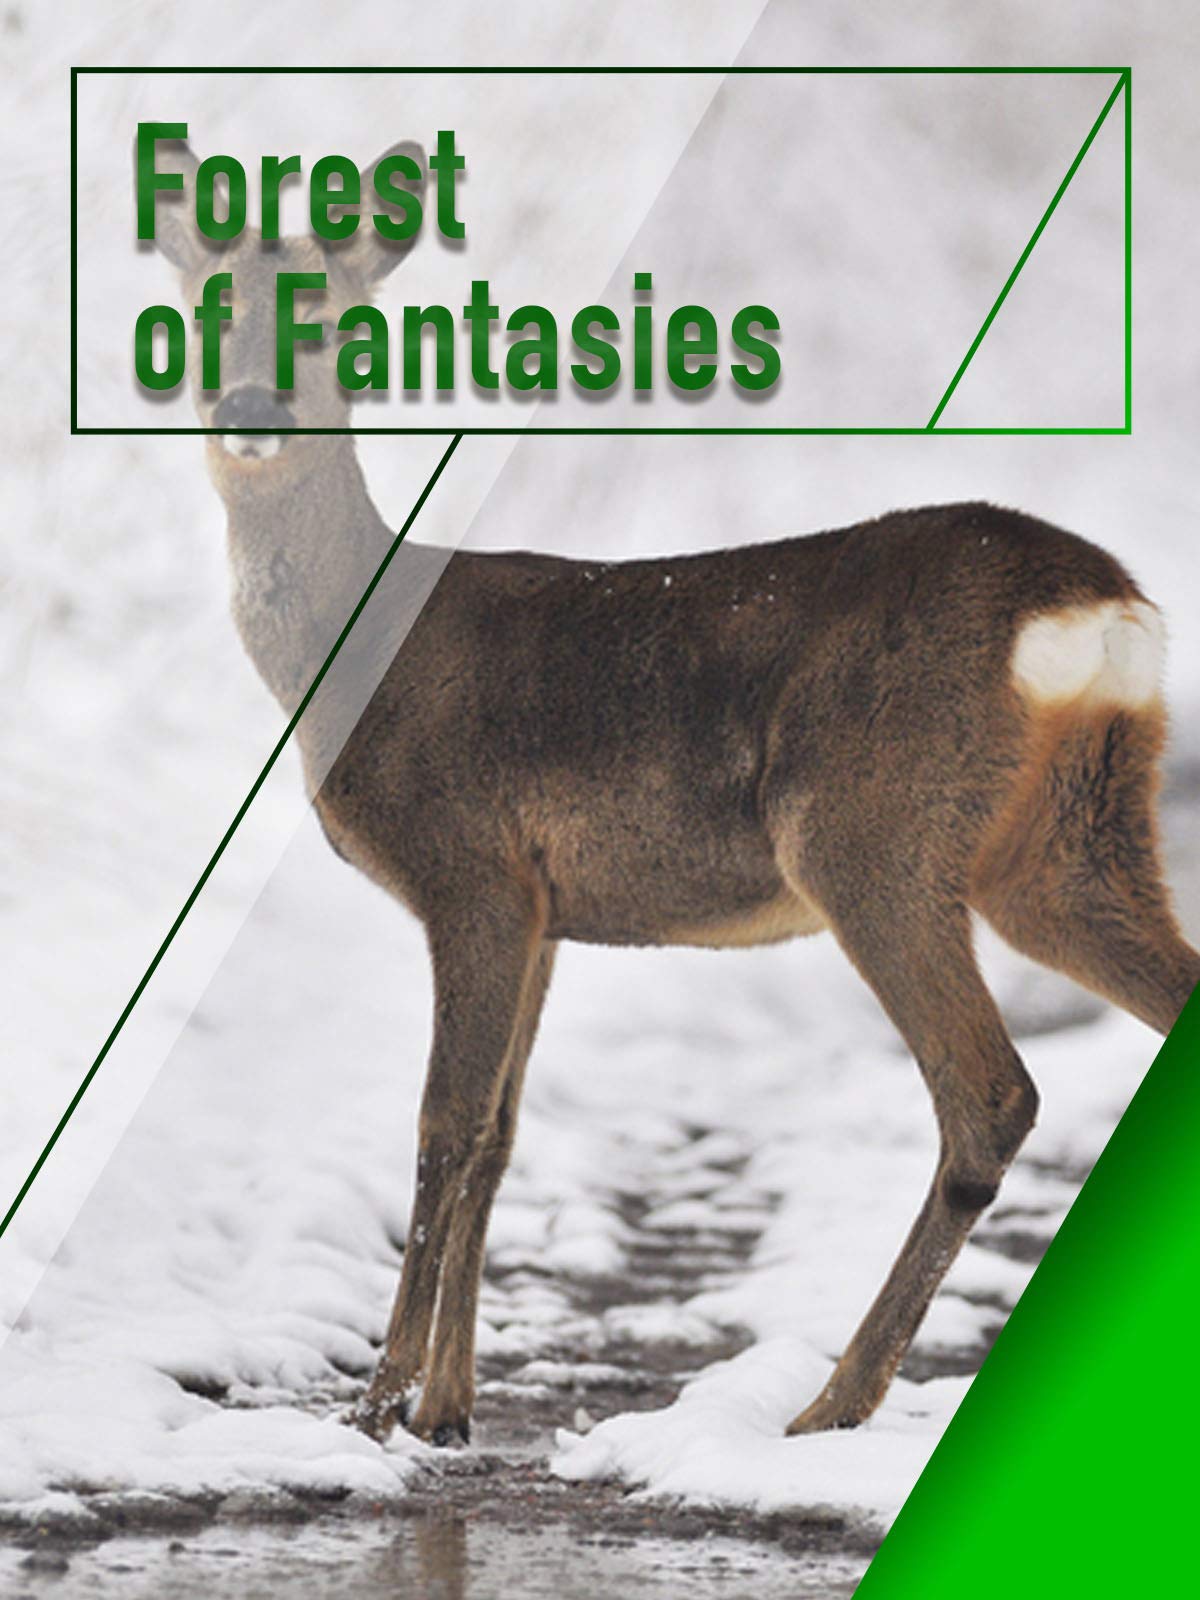 Forest of fantasies